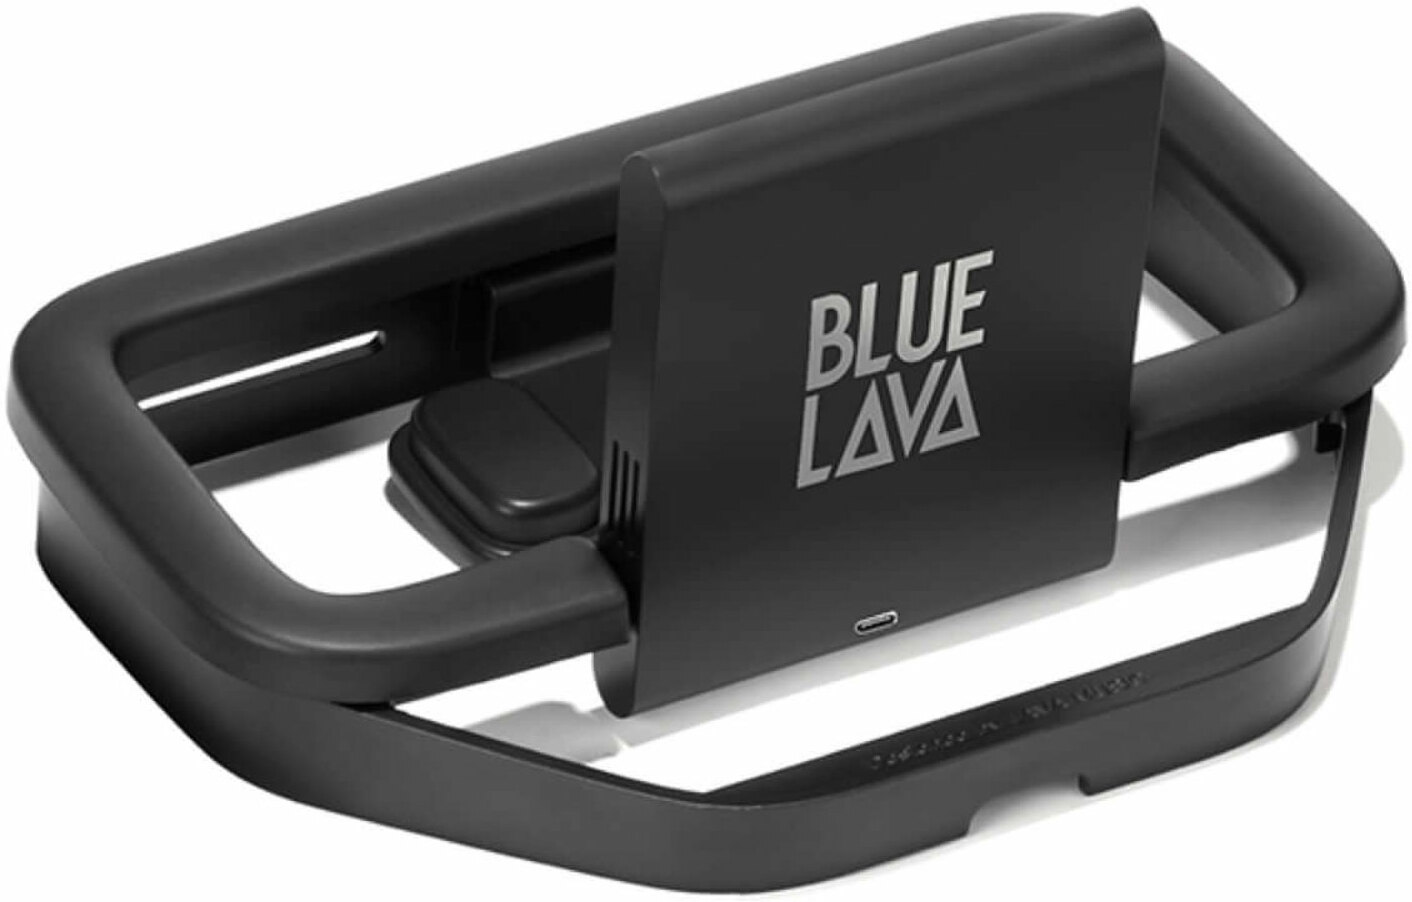 Lava Music Airflow Wireless Charger Blue Lava Guitar Stand - Batterij - Main picture